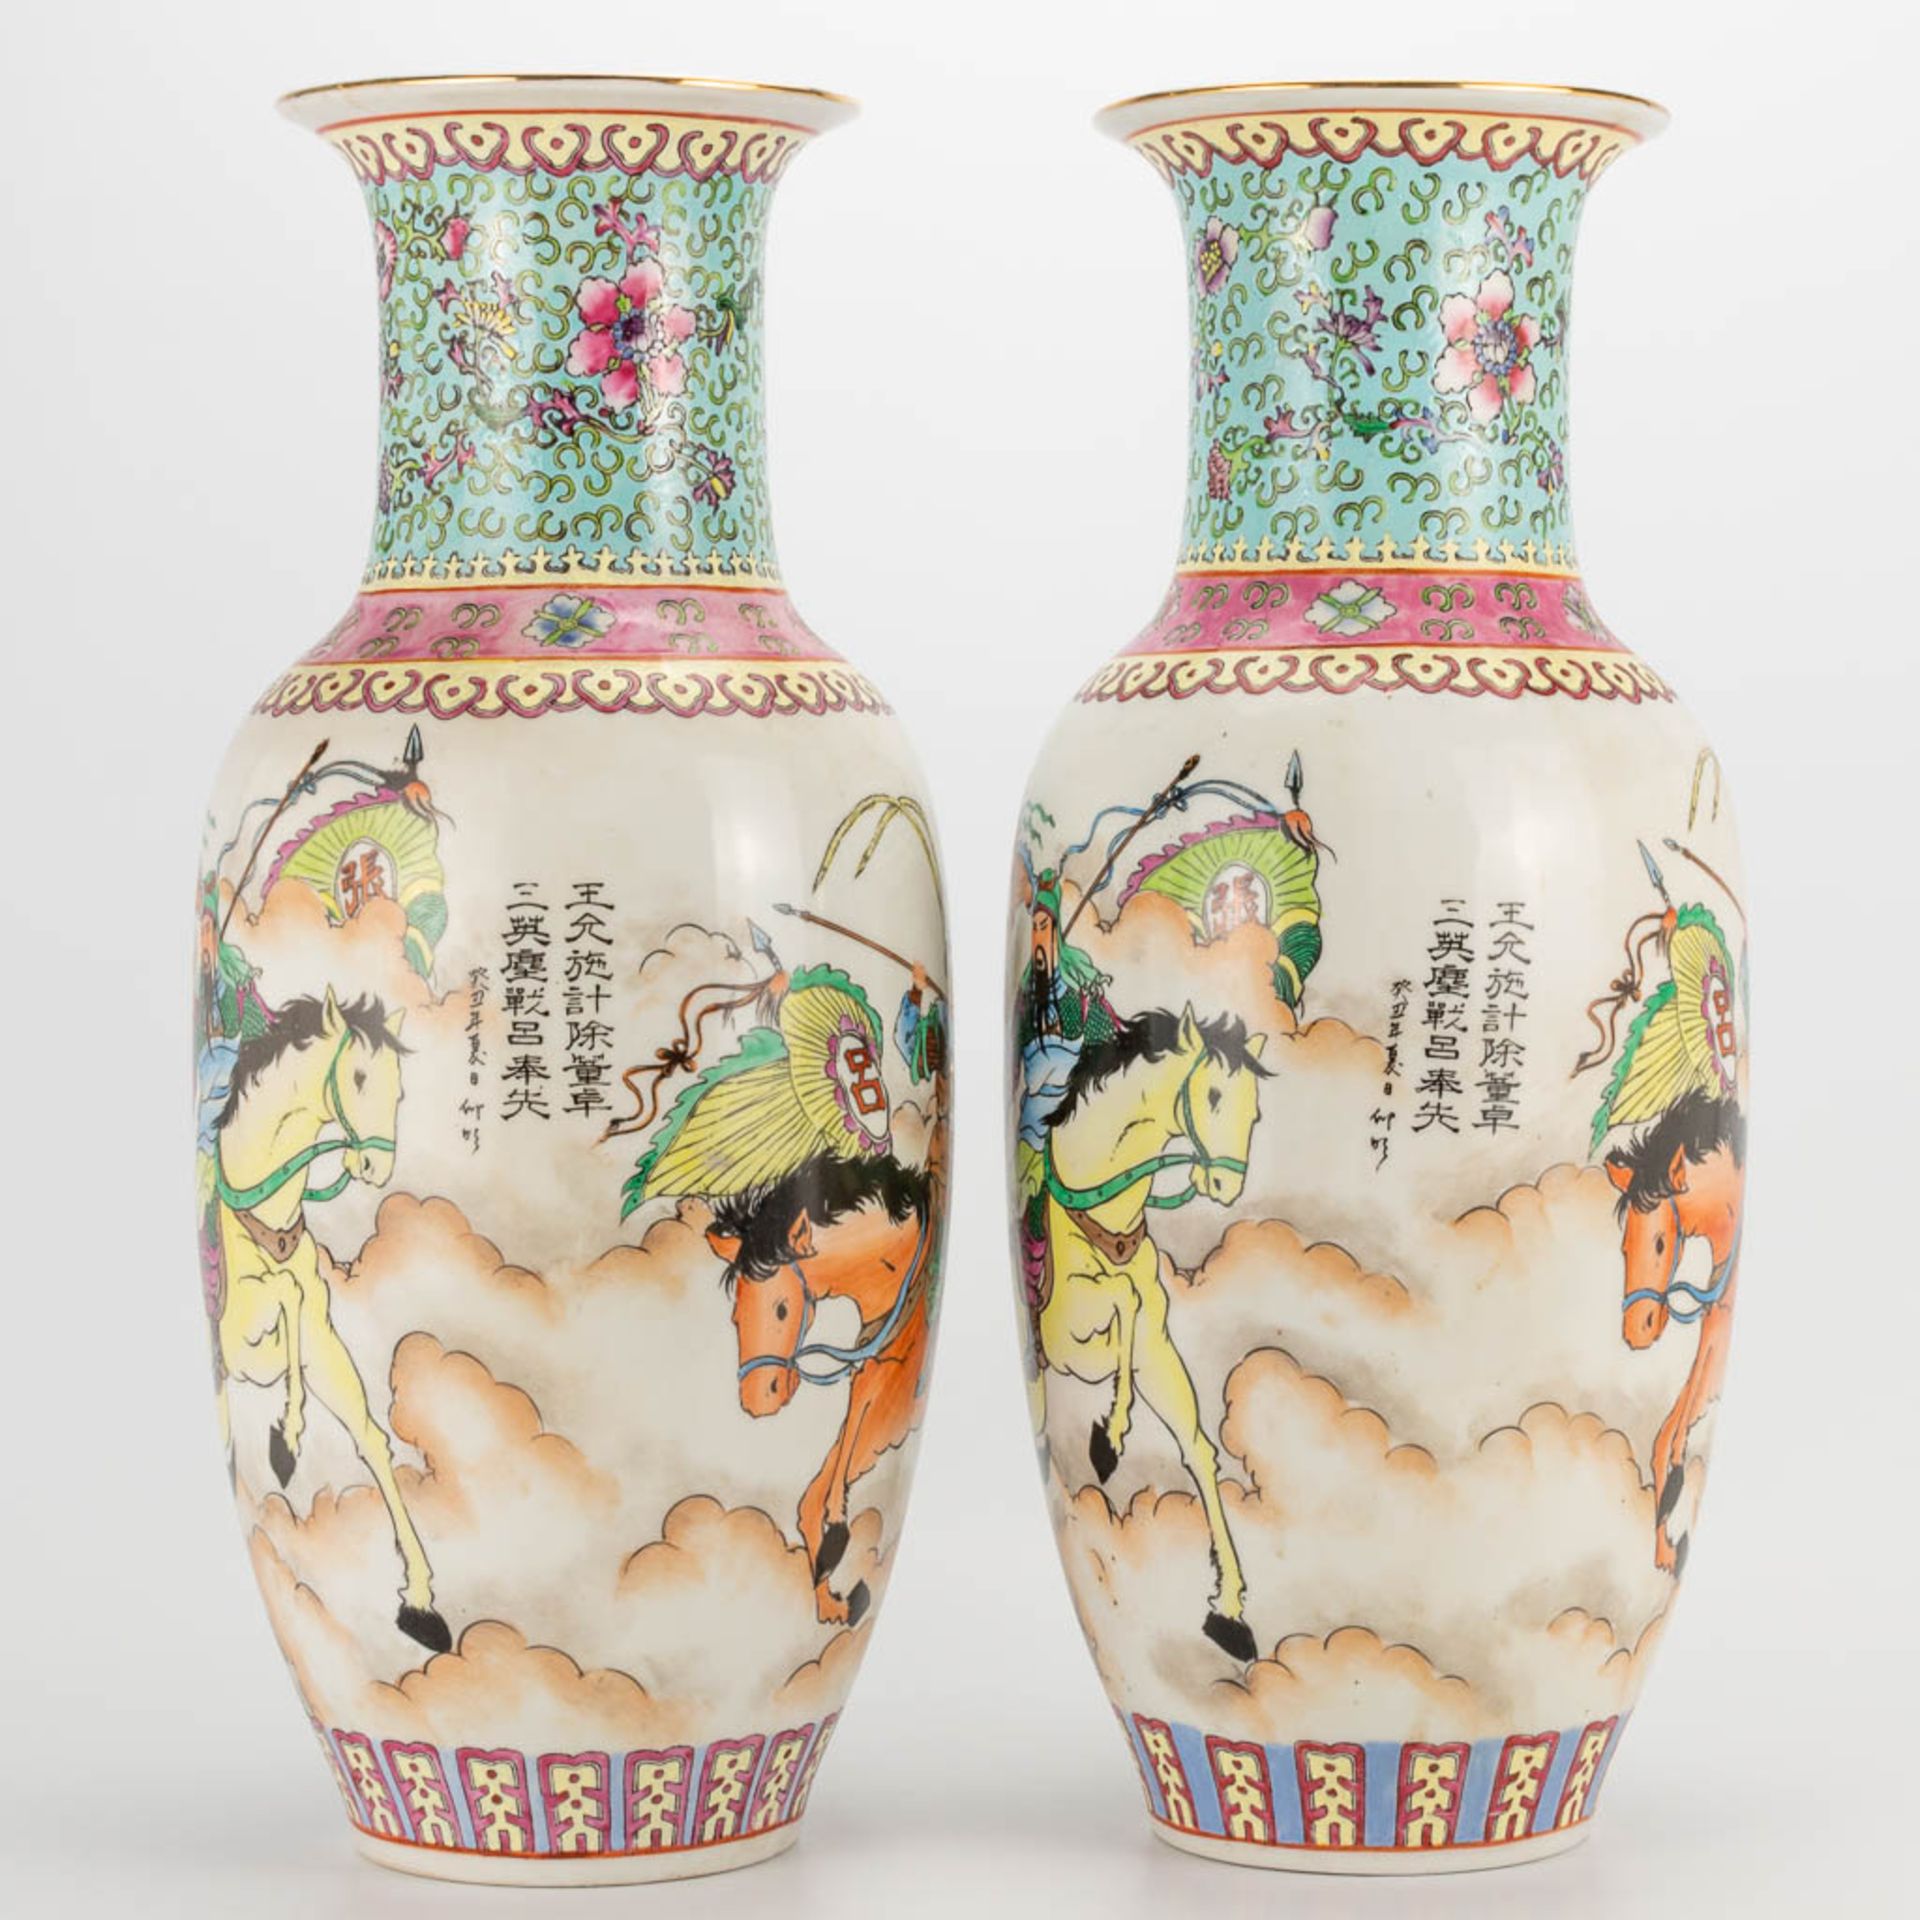 A pair of vases made of Chinese porcelain with decors of knights. 20th century. (46 x 18 cm) - Image 5 of 27